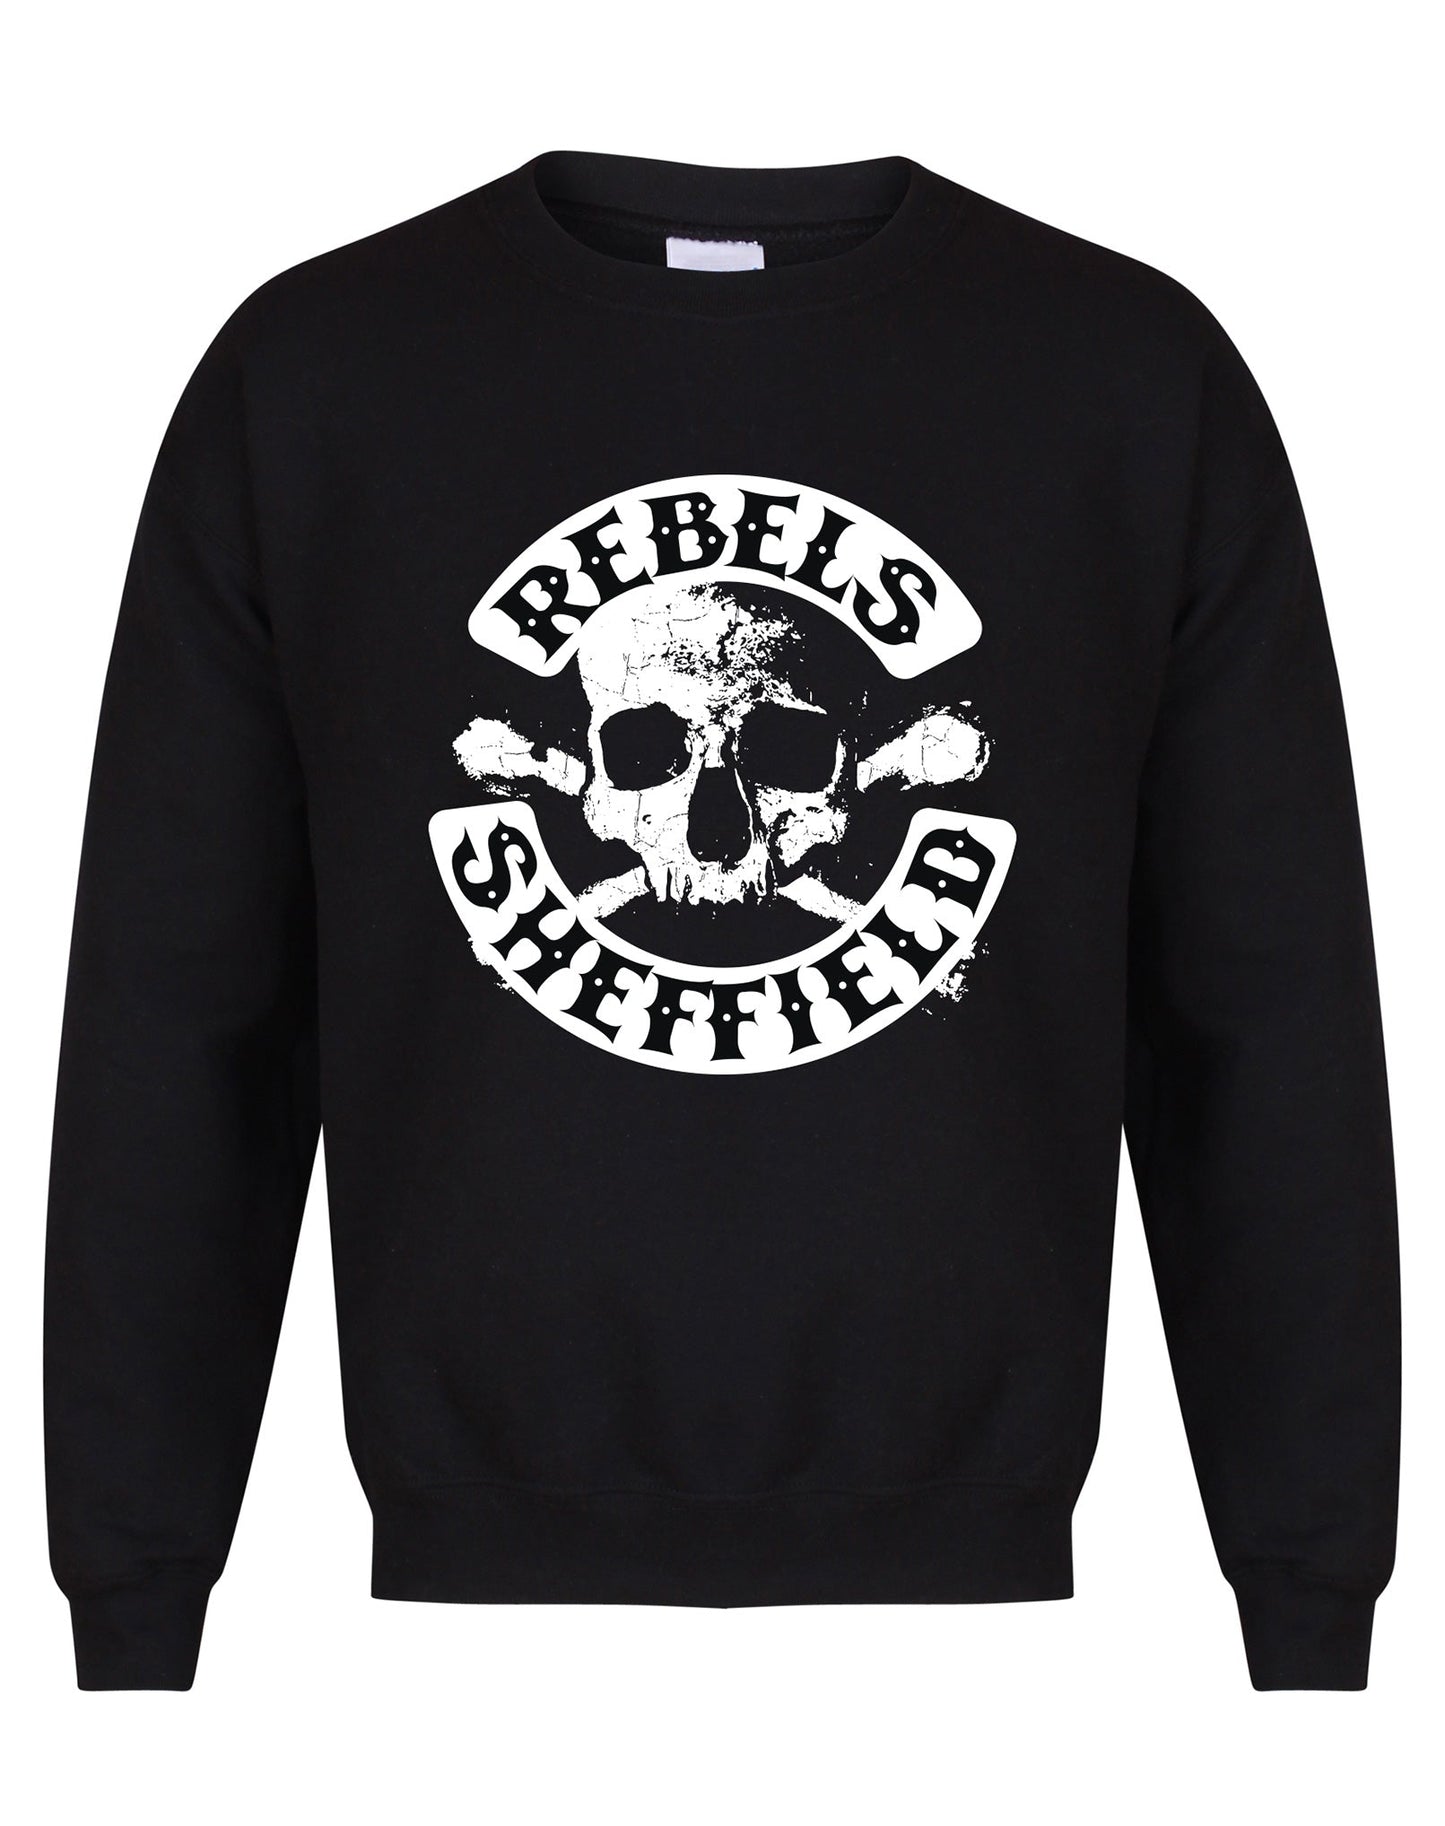 Rebels skull unisex fit sweatshirt - various colours - Dirty Stop Outs